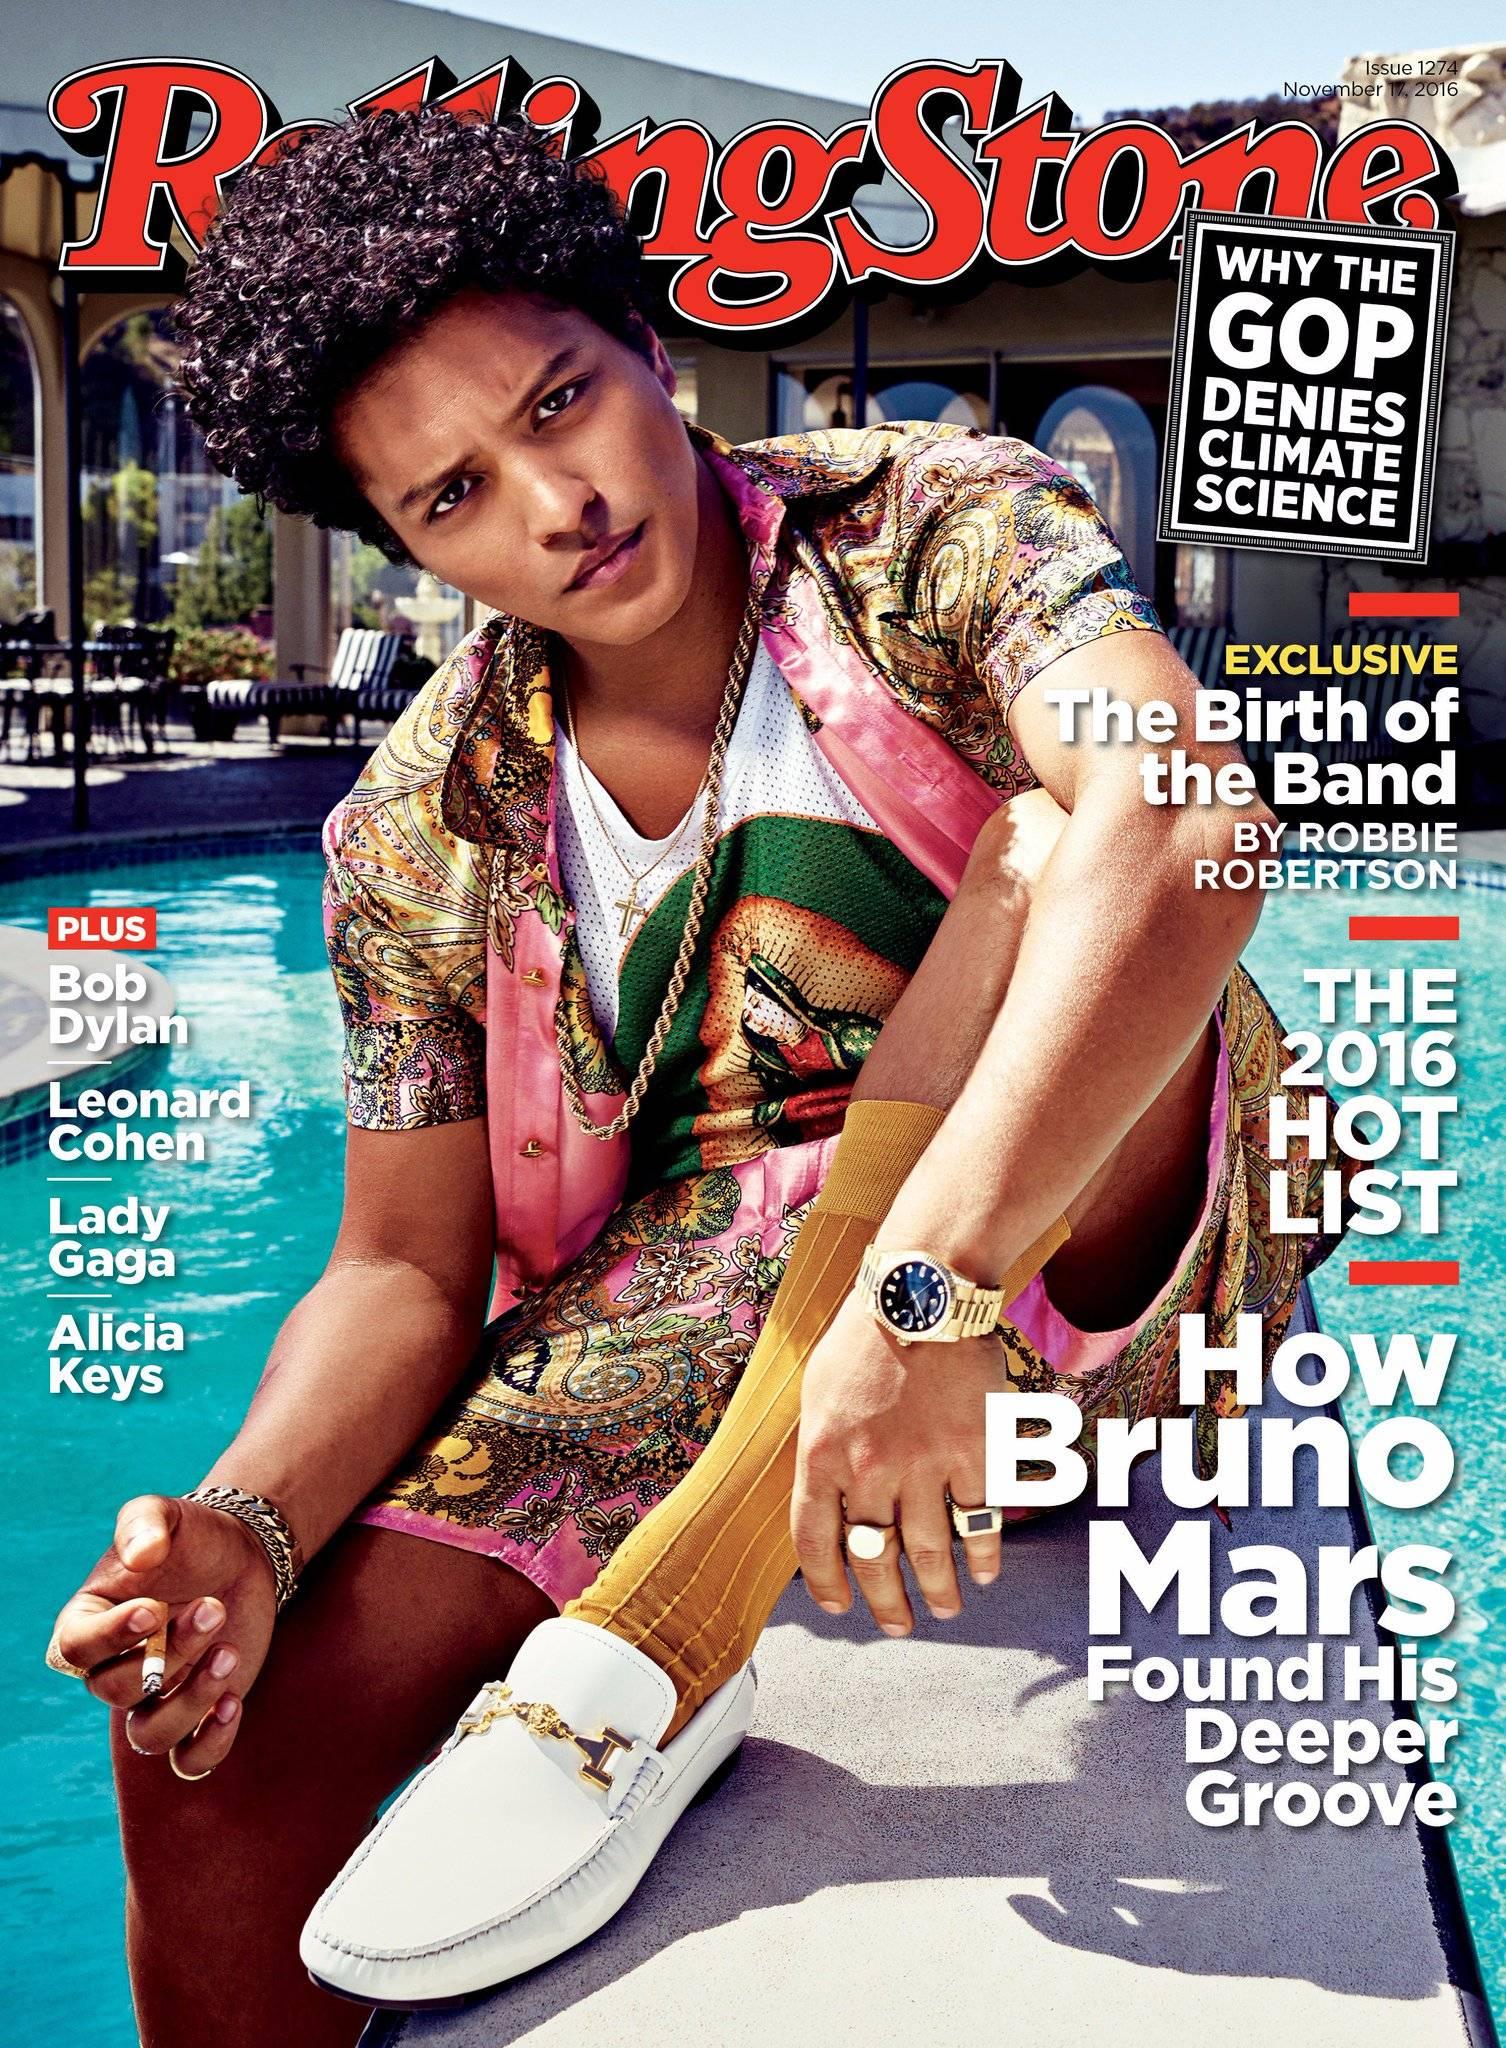 BRAND NEW 

VERSACE

Car Shoes
As seen on Bruno on the cover of Rolling Stone!

Patent leather
Signature gold-tone Medusa, rubber sole

Lining: 100% leather

Made in Italy

Italian Size is 43 - US 10
       
Brand New, in Versace box, come with